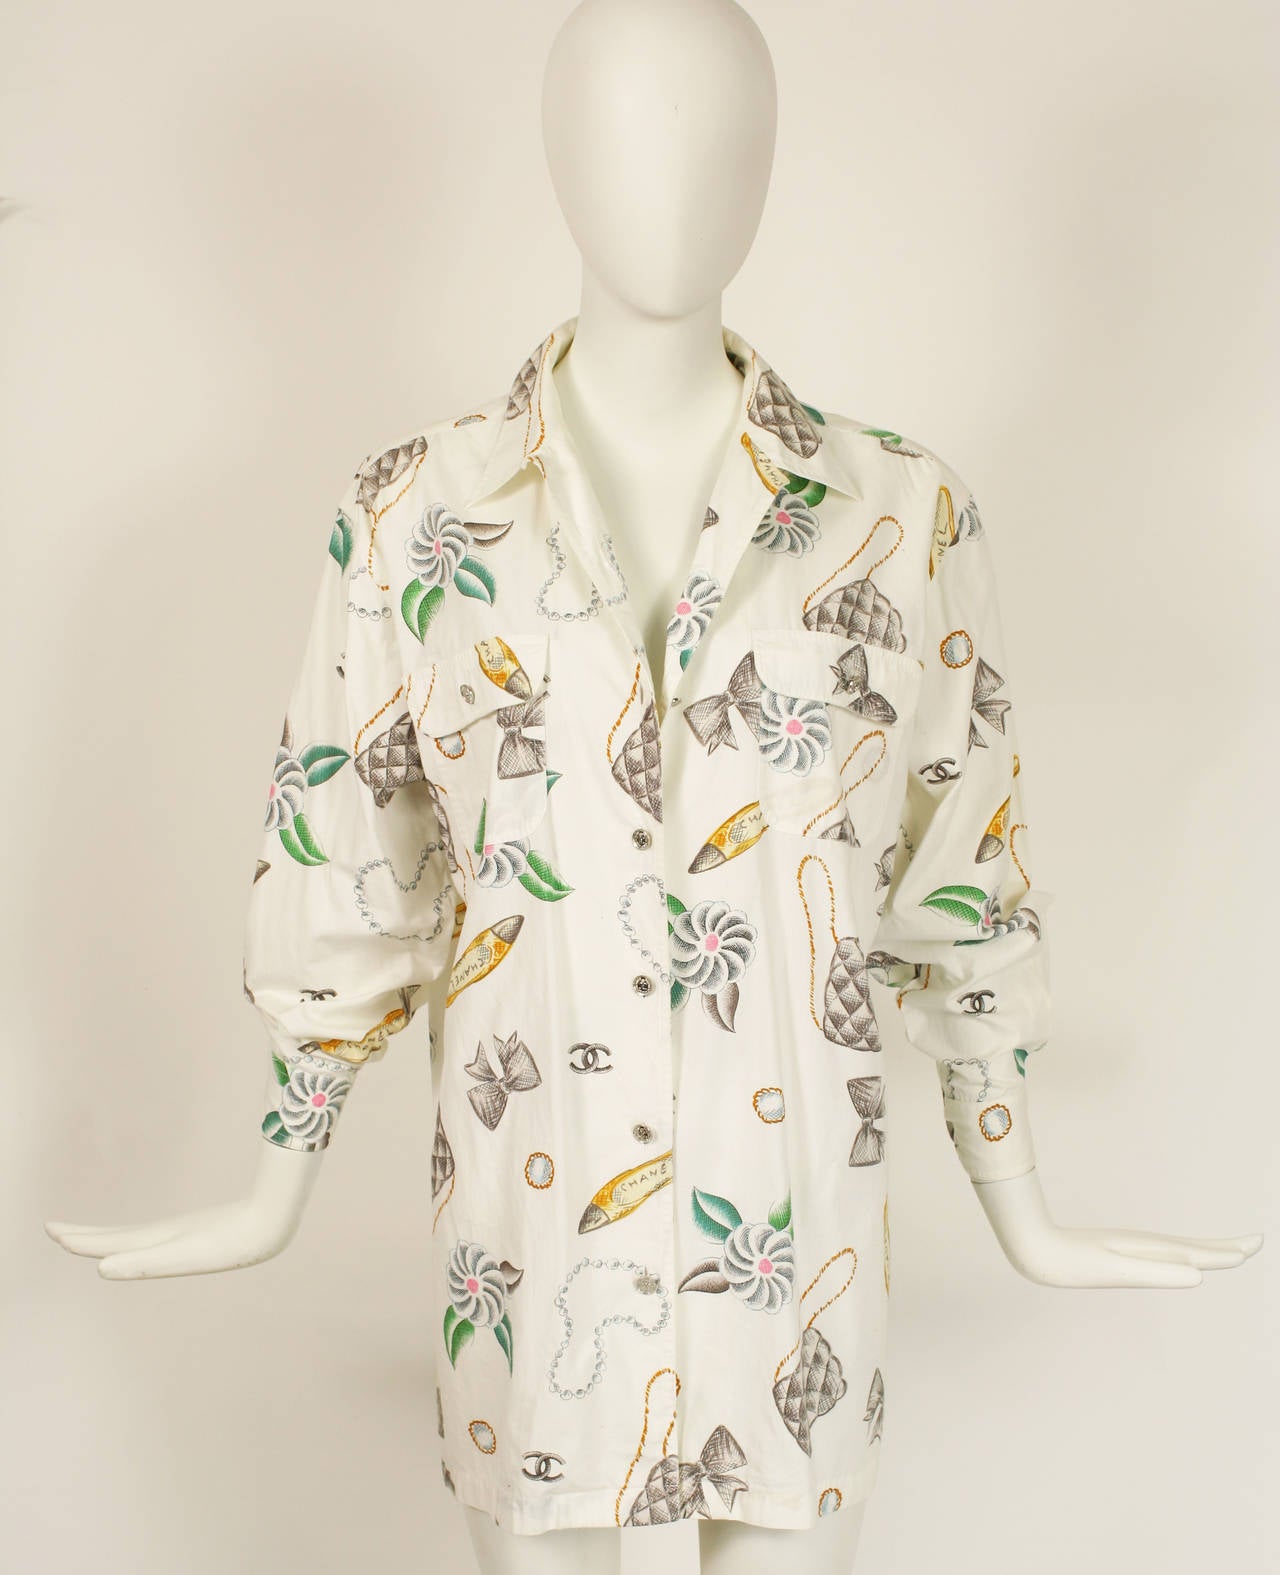 CHANEL button down shirt with camellias, logos, ballerinas, jewelry, bows, quilted bags. Oversized shirt that sound be belted and worn as a dress.  
Silver Chanel 31 Rue Cambon Paris buttons with two buttons on each cuff.  Cotton. Excellent